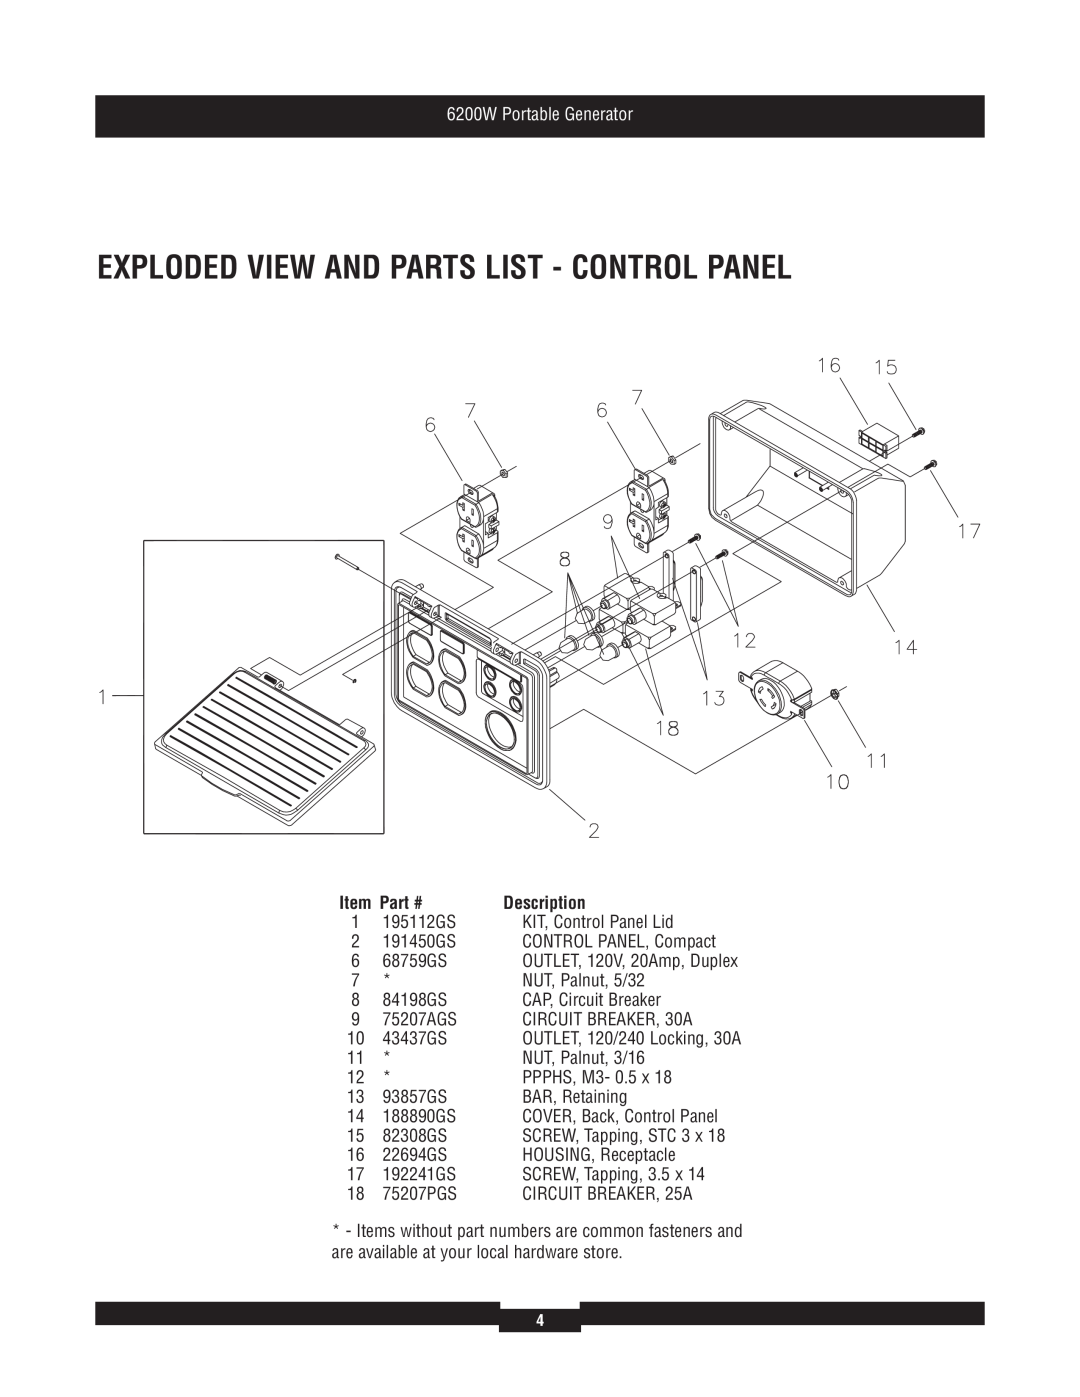 Briggs & Stratton 30386 manual Exploded View And Parts List - Control Panel, 6200W Portable Generator, Description 